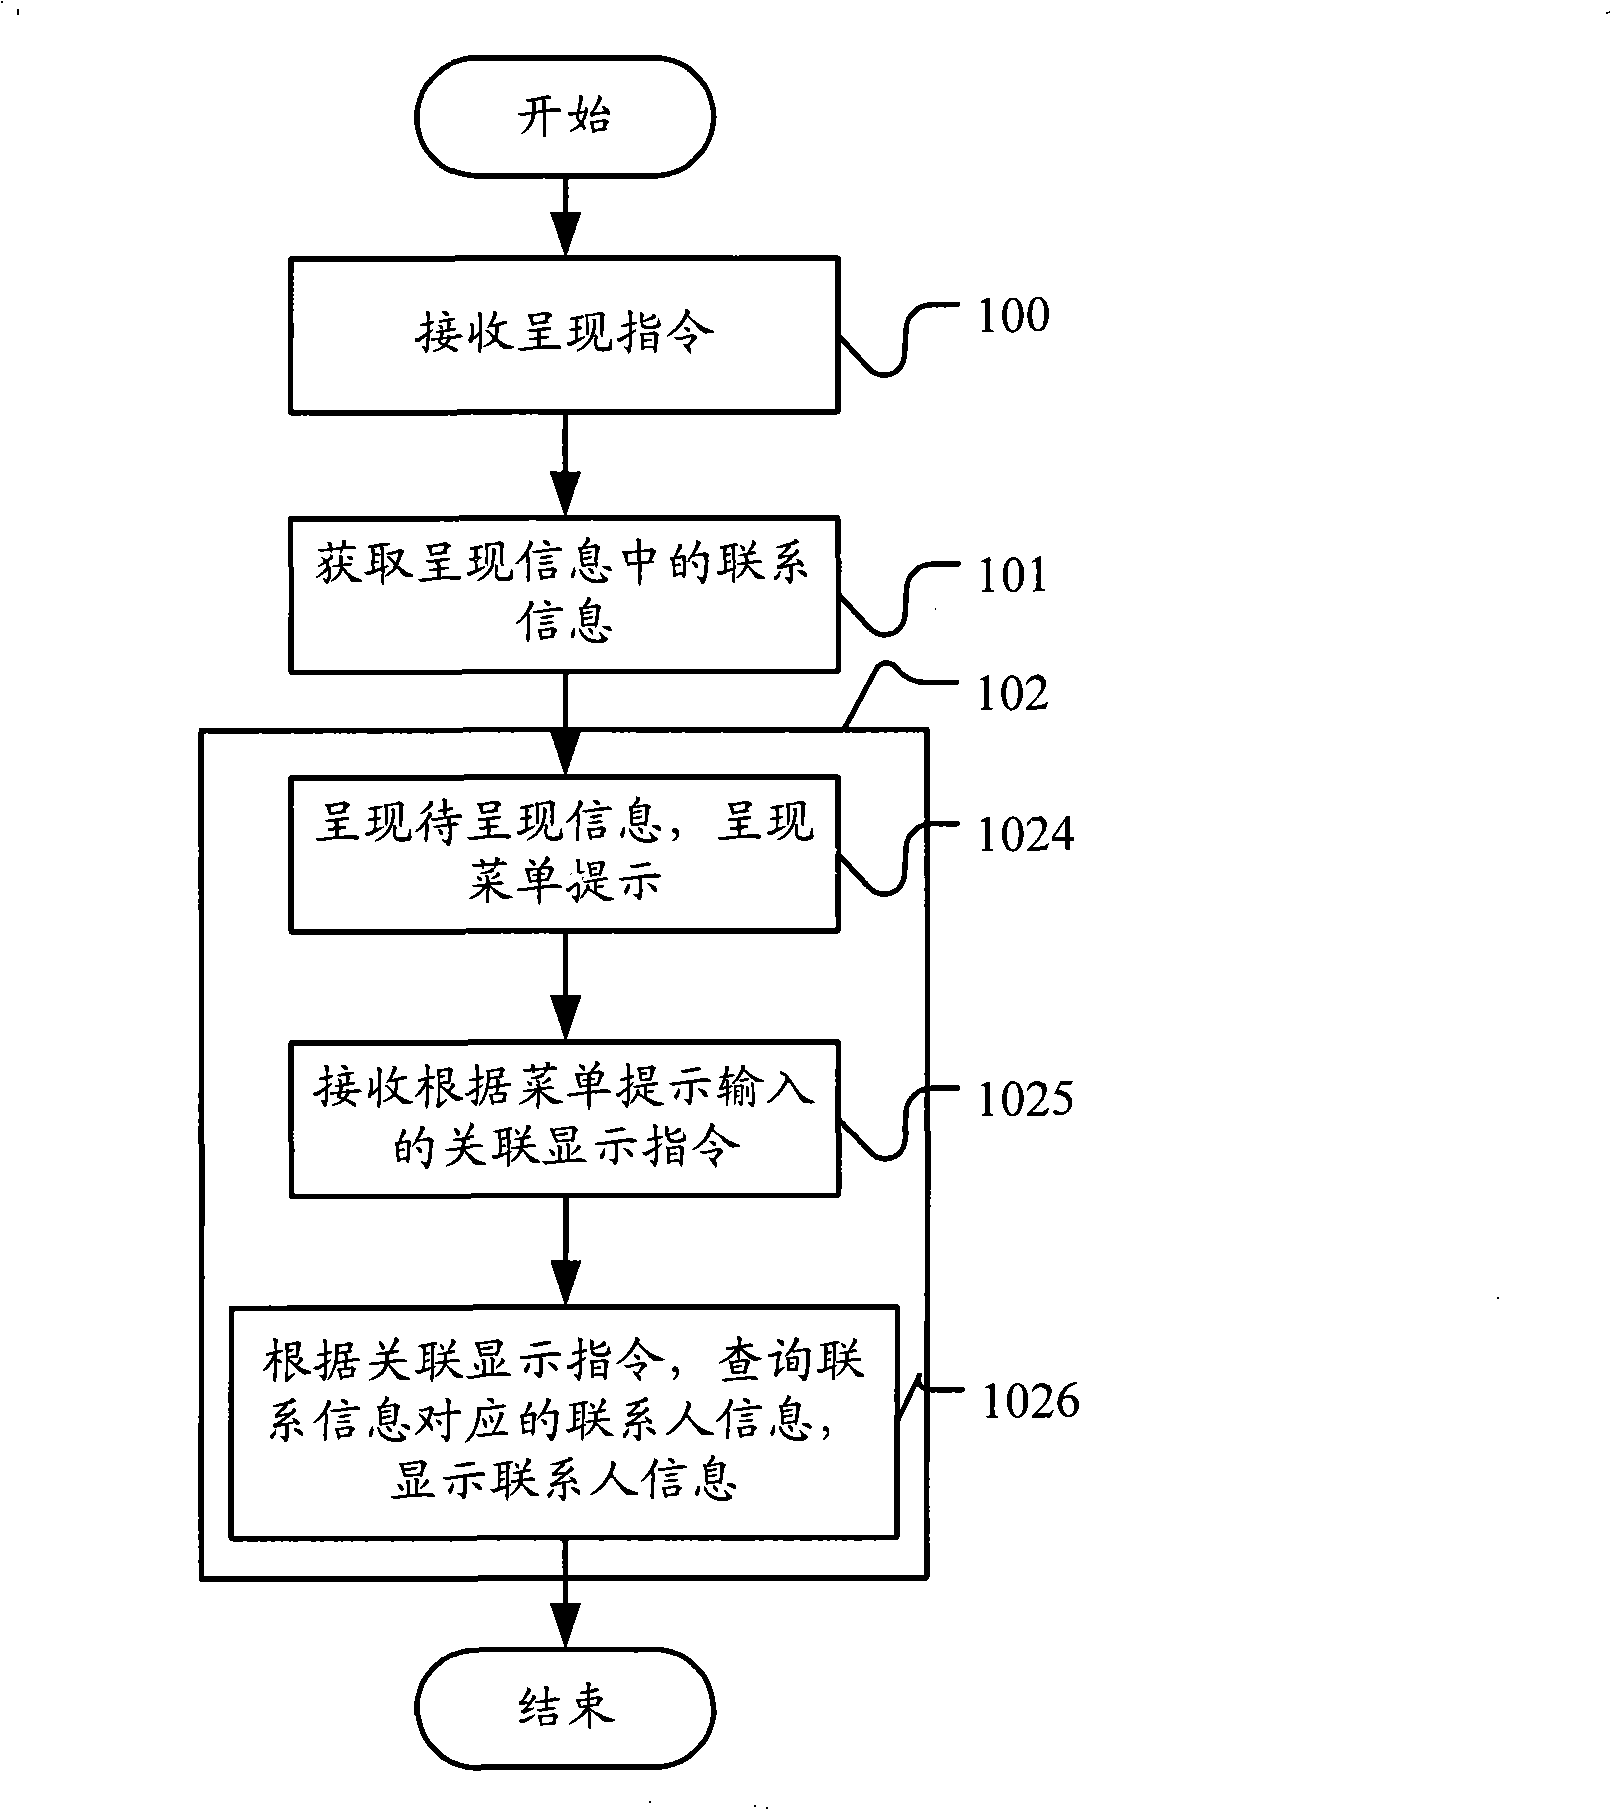 Method for showing information and communication terminal